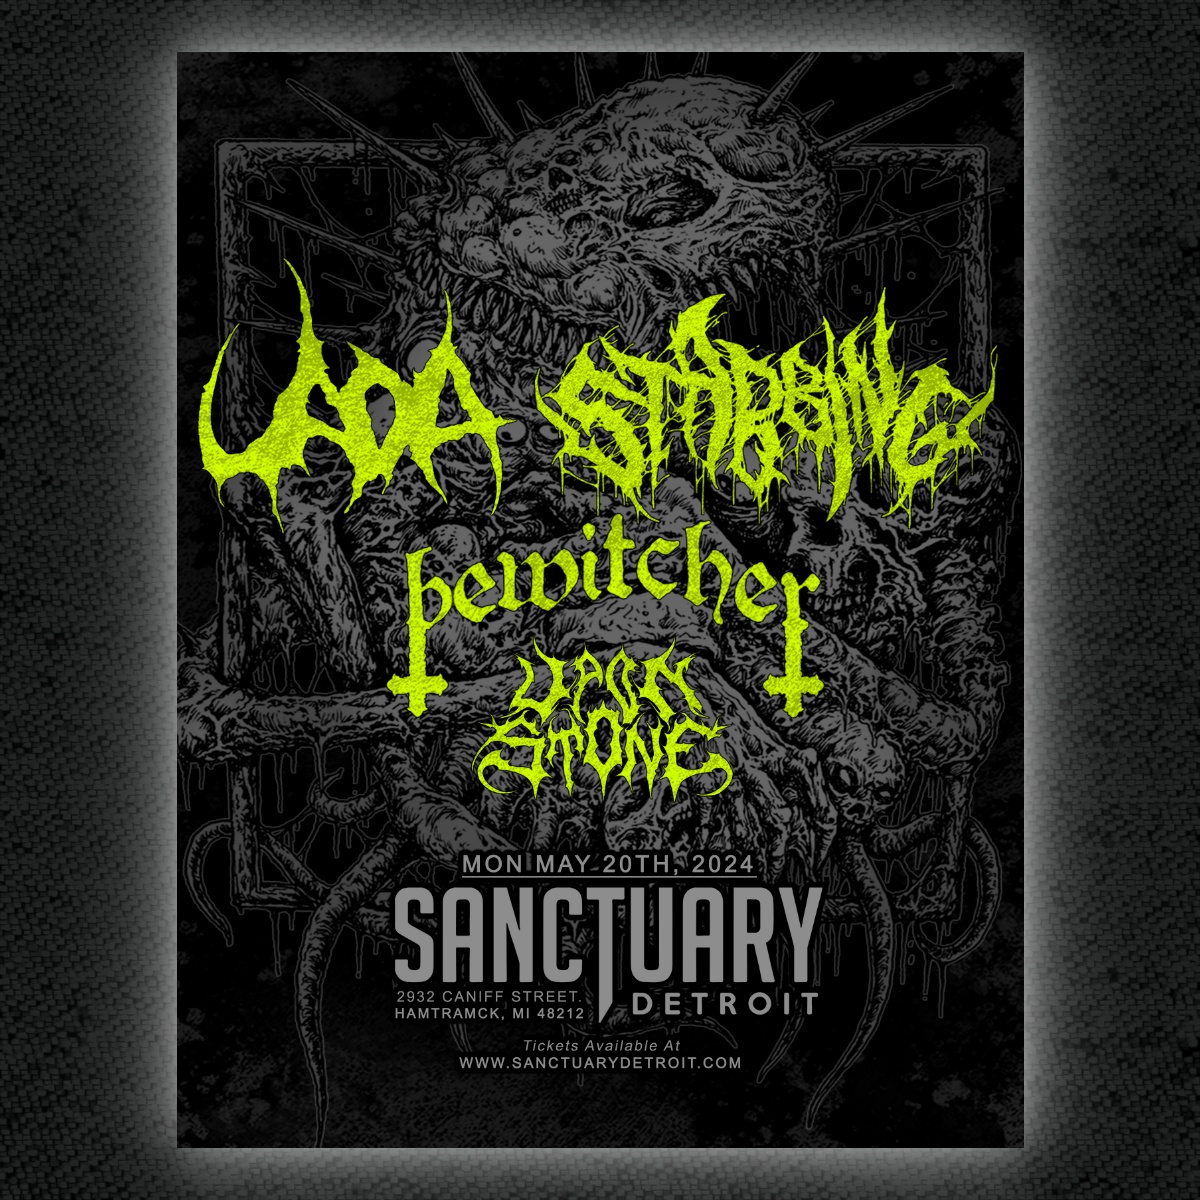 Uada, Stabbing, Bewitcher and Upon Stone hit The Sanctuary 5/20 !! Grab your tickets at sanctuarydetroit.com